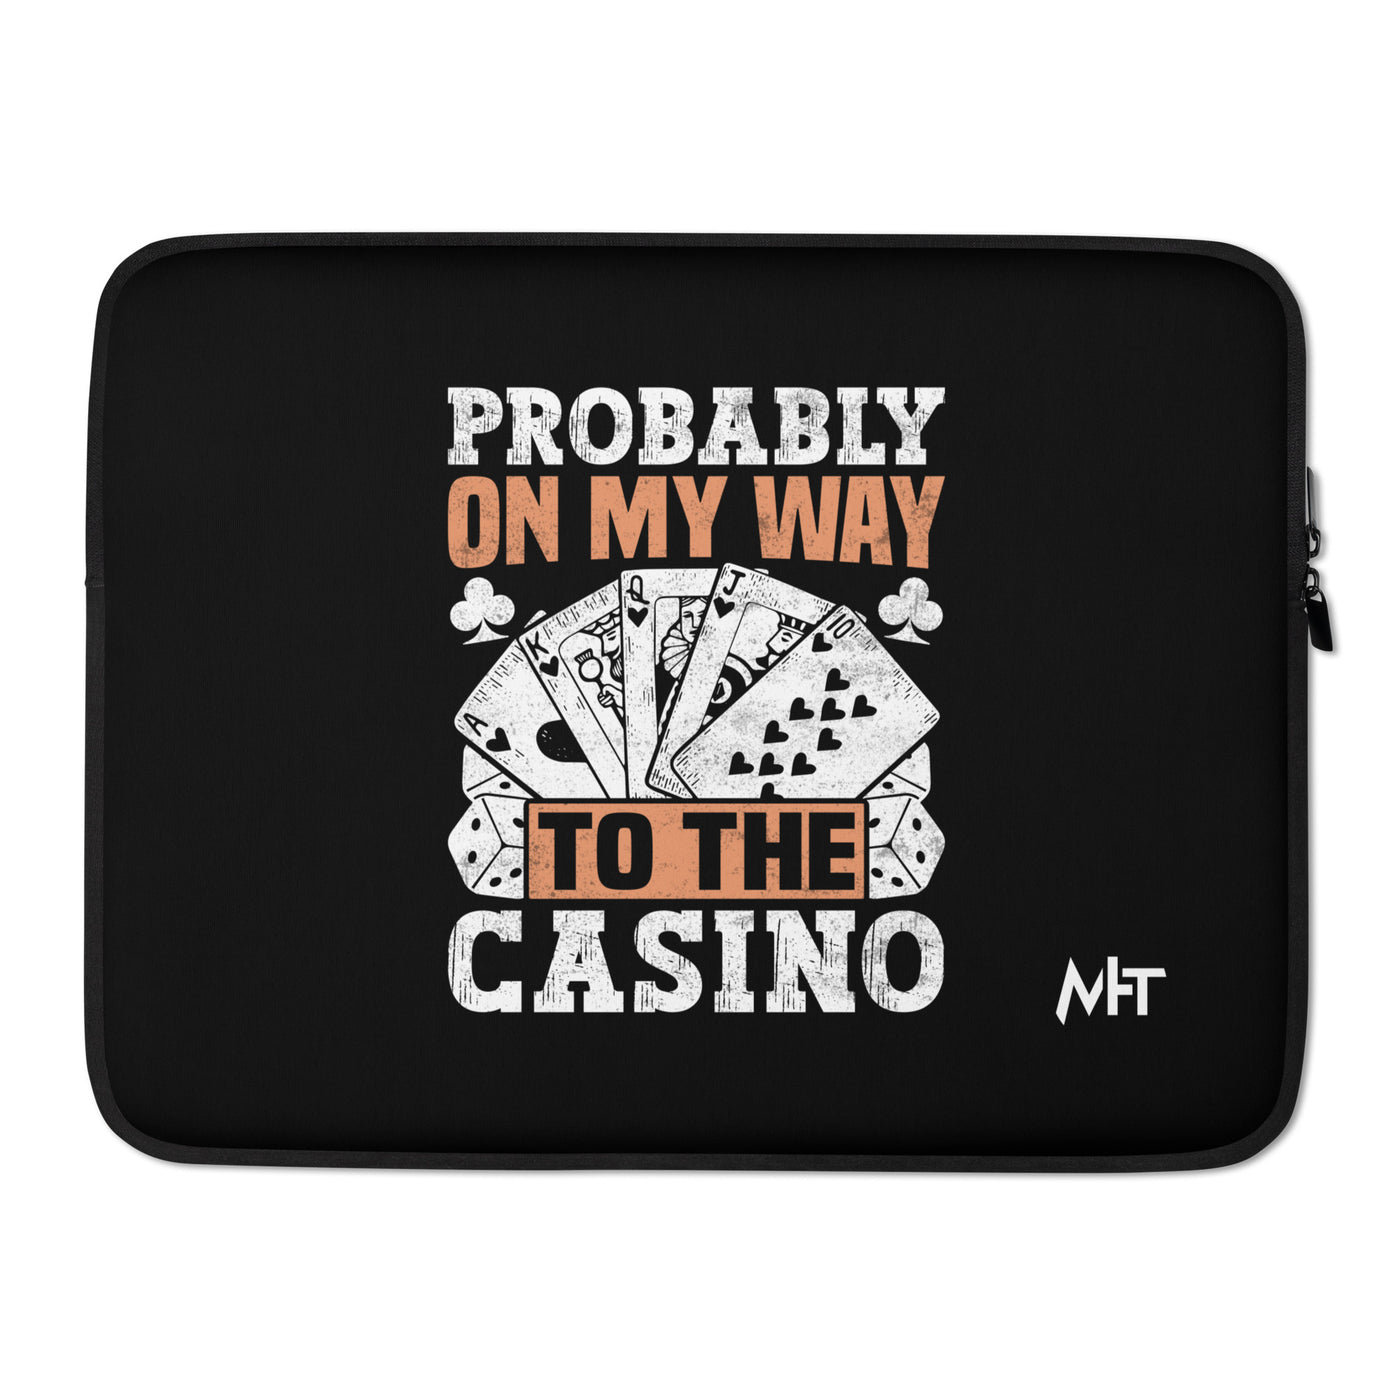 Probably, my way to the Casino - Laptop Sleeve